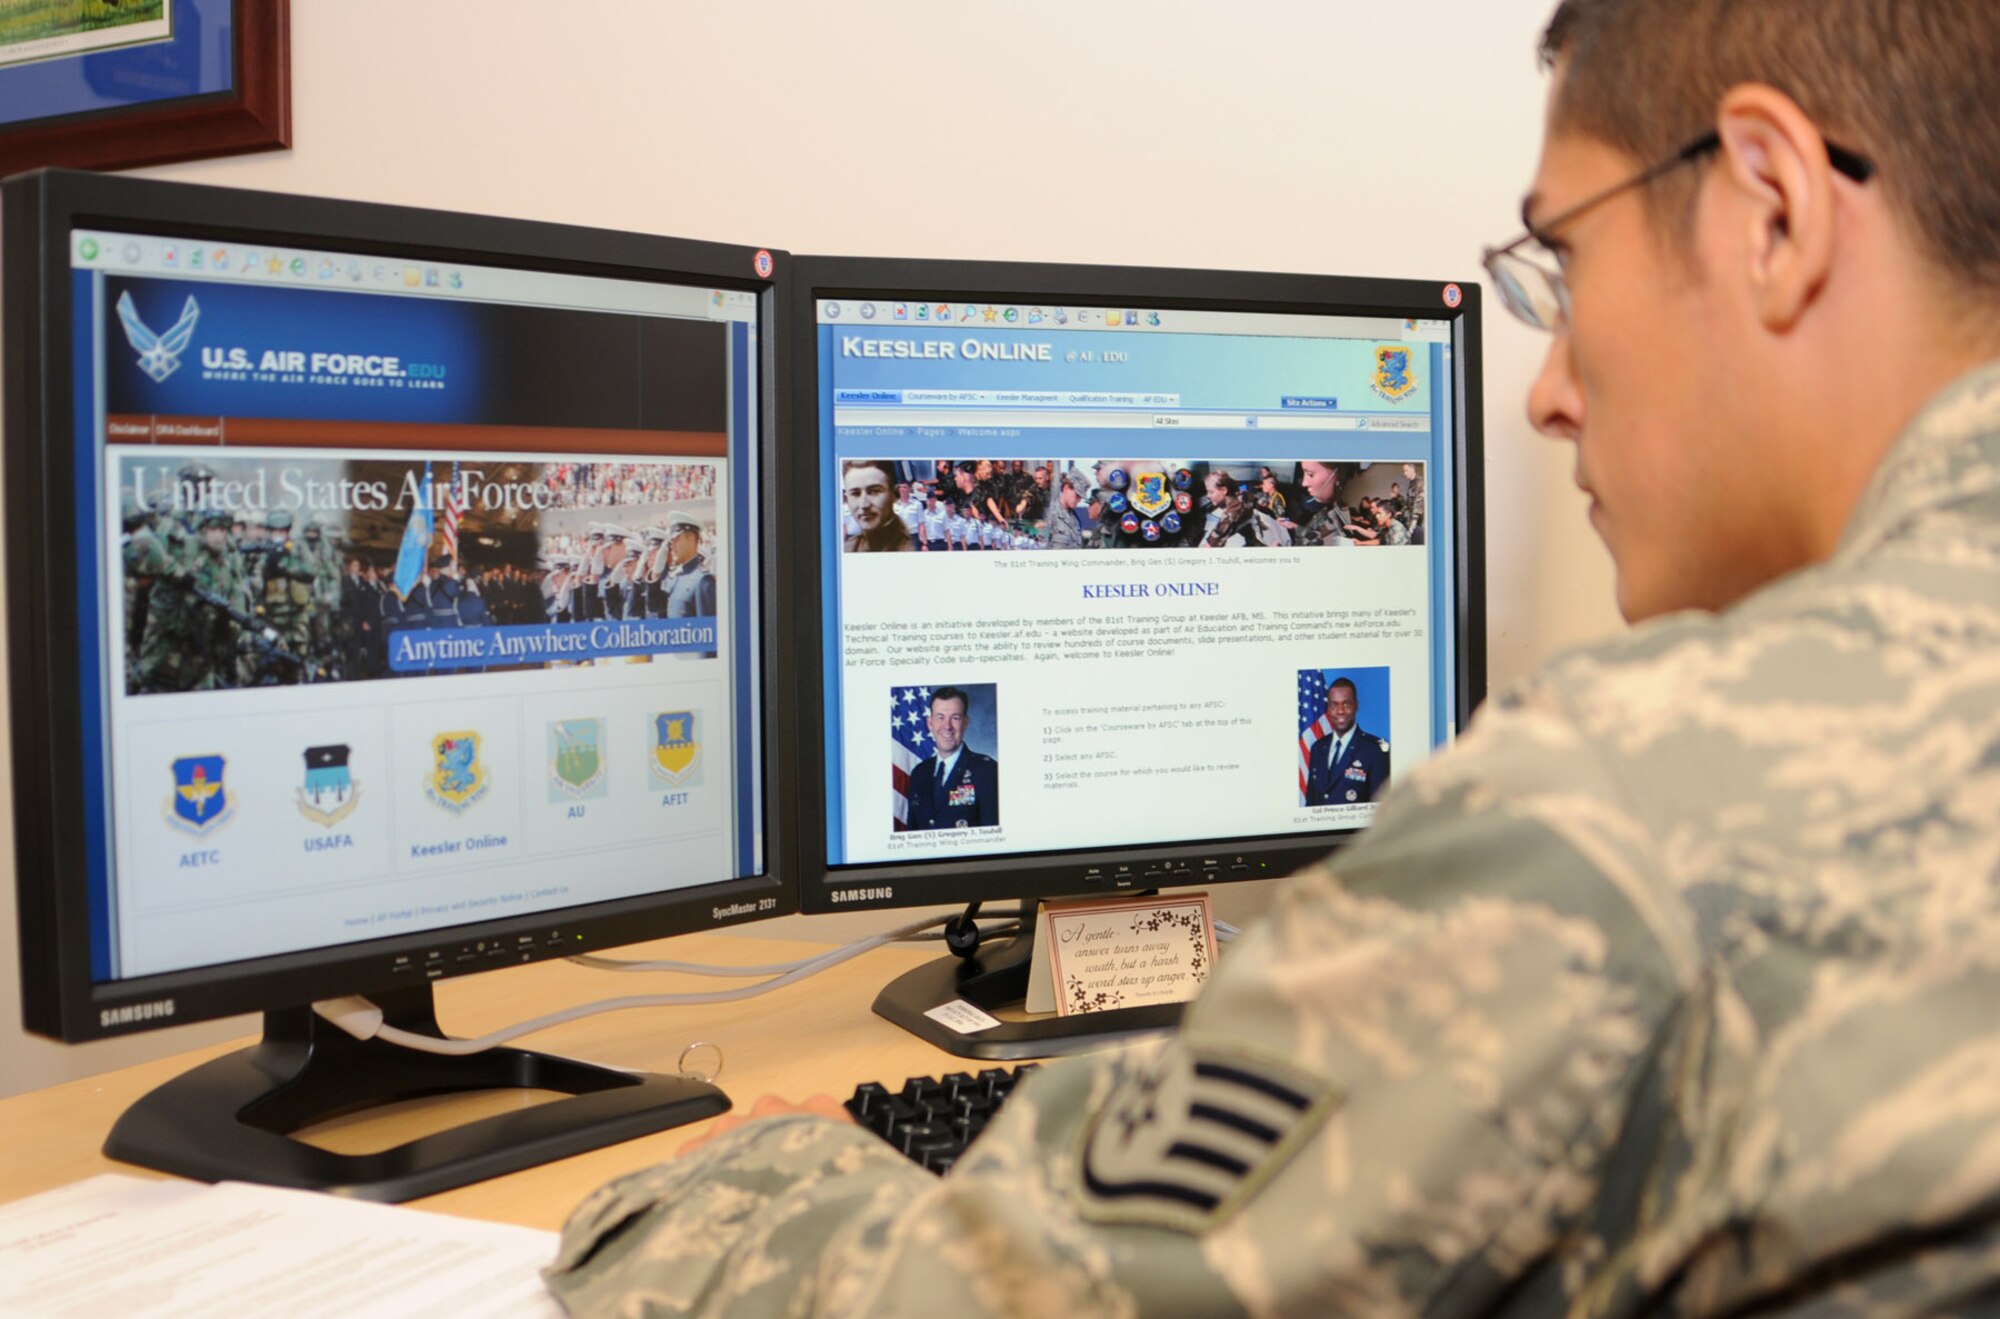 Staff Sgt. Alberto Trujillo, 81st TRSS, checks out Keesler Online.  (U.S. Air Force photo by Kemberly Groue)